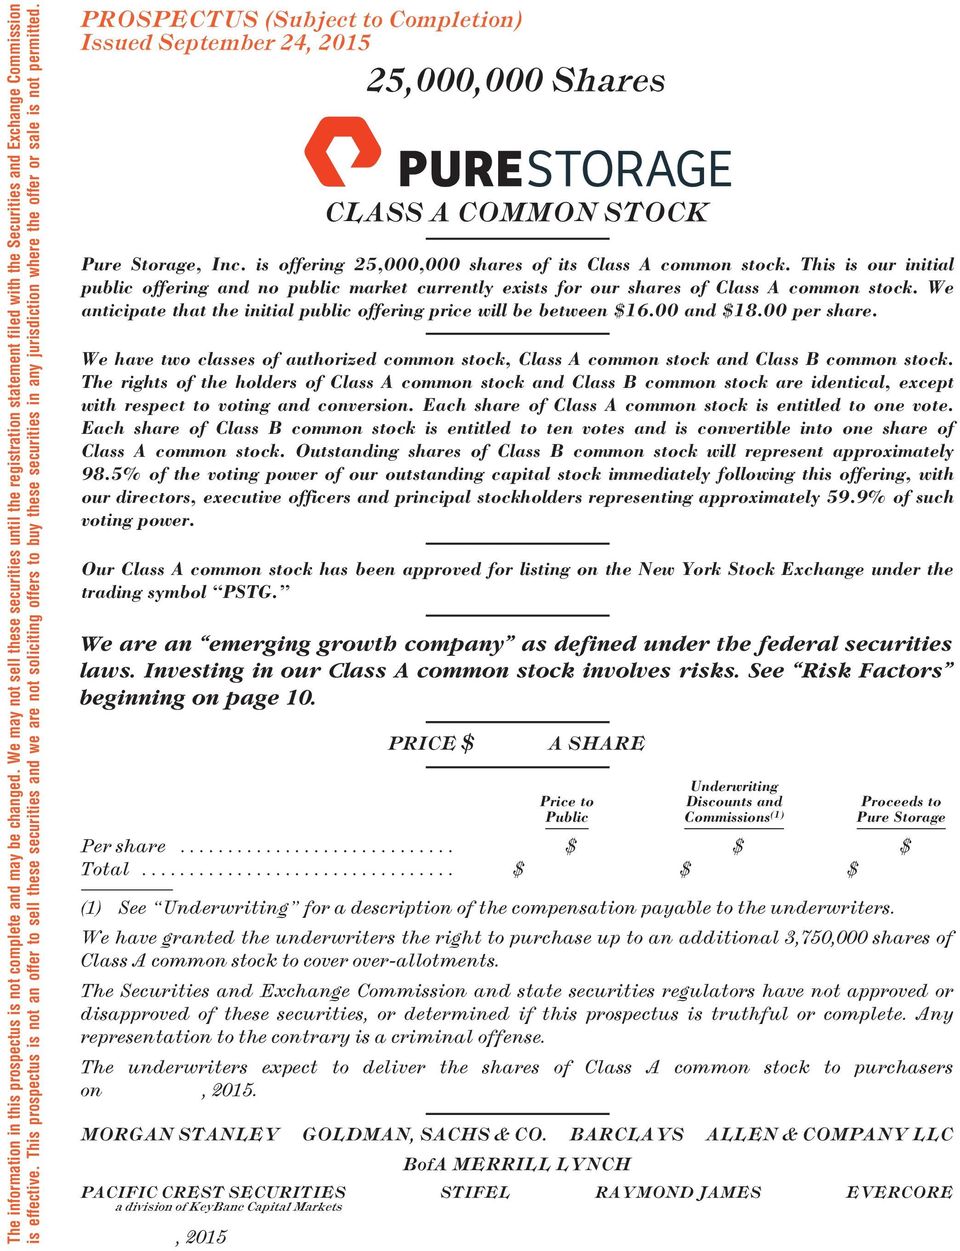 PROSPECTUS (Subject to Completion) Issued September 24, 2015 25,000,000 Shares CLASS A COMMON STOCK Pure Storage, Inc. is offering 25,000,000 shares of its Class A common stock.